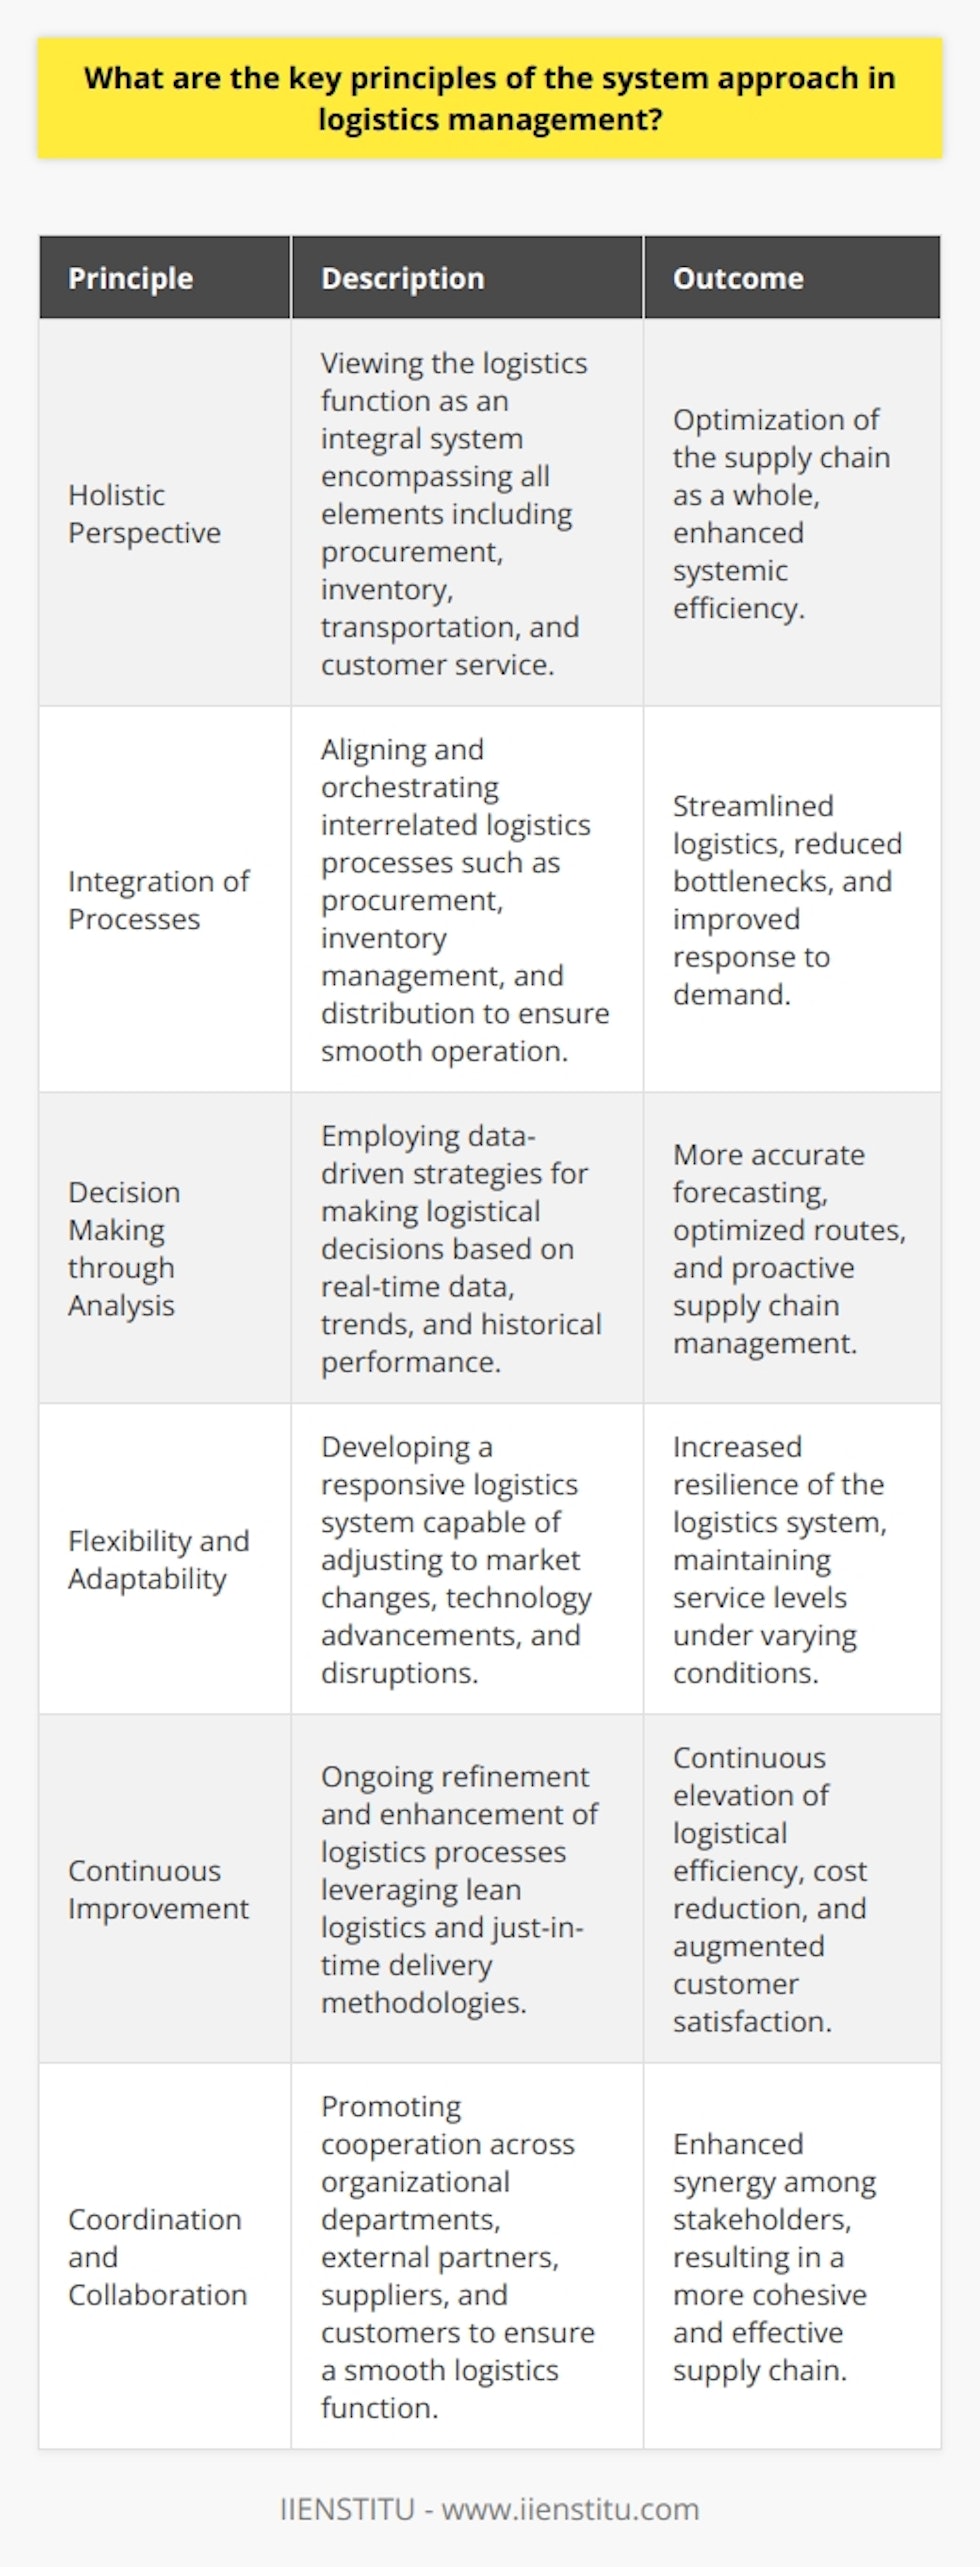 The system approach in logistics management is a perspective that views the logistics function as a cohesive entity, rather than as a collection of disparate parts. Implementing this approach requires a set of key principles that guide the orchestration of logistical activities, ensuring that the entire supply chain operates harmoniously towards the attainment of the overarching organizational goals. Here are the core principles that define the system approach in logistics management:Holistic Perspective: In the system approach, organizations perceive the logistics function as an integral entity encompassing myriad elements such as procurement, inventory management, transportation, and customer service. By embracing a panoramic view, logistics managers can understand how changes in one segment can ripple through and impact the entire system. This holistic perspective seeks to optimize the supply chain in its entirety rather than sub-optimizing individual components.Integration of Processes: Logistics is an intricate web of interrelated processes that must be seamlessly aligned. Integration involves orchestrating procurement with inventory levels, aligning warehousing with distribution channels, and synchronizing inbound and outbound logistics. This streamlined integration ensures that the movement of goods is smooth and responsive to demand while minimizing bottlenecks and redundancies.Decision Making through Analysis: Data-driven decision-making is the crux of the systems approach, where logistics functions rely on empirical evidence to steer strategic and operational decisions. By analyzing real-time data, trends, and historical performance, managers can forecast demand, optimize routes, manage stock levels, and position the supply chain for proactive rather than reactive responses.Flexibility and Adaptability: Given the dynamic nature of markets, a rigid logistics system is a recipe for inefficiency. The system approach requires an adaptable structure, capable of responding quickly to market changes, technological advancements, and unforeseen disruptions such as natural disasters or geopolitical events. This adaptability ensures the logistics system can maintain service levels and respond to new opportunities or threats.Continuous Improvement: The system approach is an iterative one, advocating for relentless pursuit of excellence within logistics activities. Through continuous monitoring, review, and enhancement, logistics systems evolve to become more efficient, cost-effective, and customer-centric. Embracing concepts such as lean logistics, just-in-time (JIT) delivery, and the use of advanced analytics are all integral to this principle of perpetual betterment. Coordination and Collaboration: Effective logistics does not operate in a silo; it is the result of concerted efforts across various departments within an organization, as well as external partners such as suppliers, logistics service providers, and customers. Inter-organizational collaboration and coordination are crucial to ensuring that the logistics system functions smoothly and efficiently, leveraging each stakeholder’s strengths and capabilities.By upholding these principles, logistics management can transcend traditional constraints and leverage the system approach to create a resilient, high-performing supply chain that drives competitive advantage and meets the evolving demands of the marketplace. It is these principles that can transform logistics from a cost center to a strategic asset, contributing to the long-term sustainability and success of an organization.